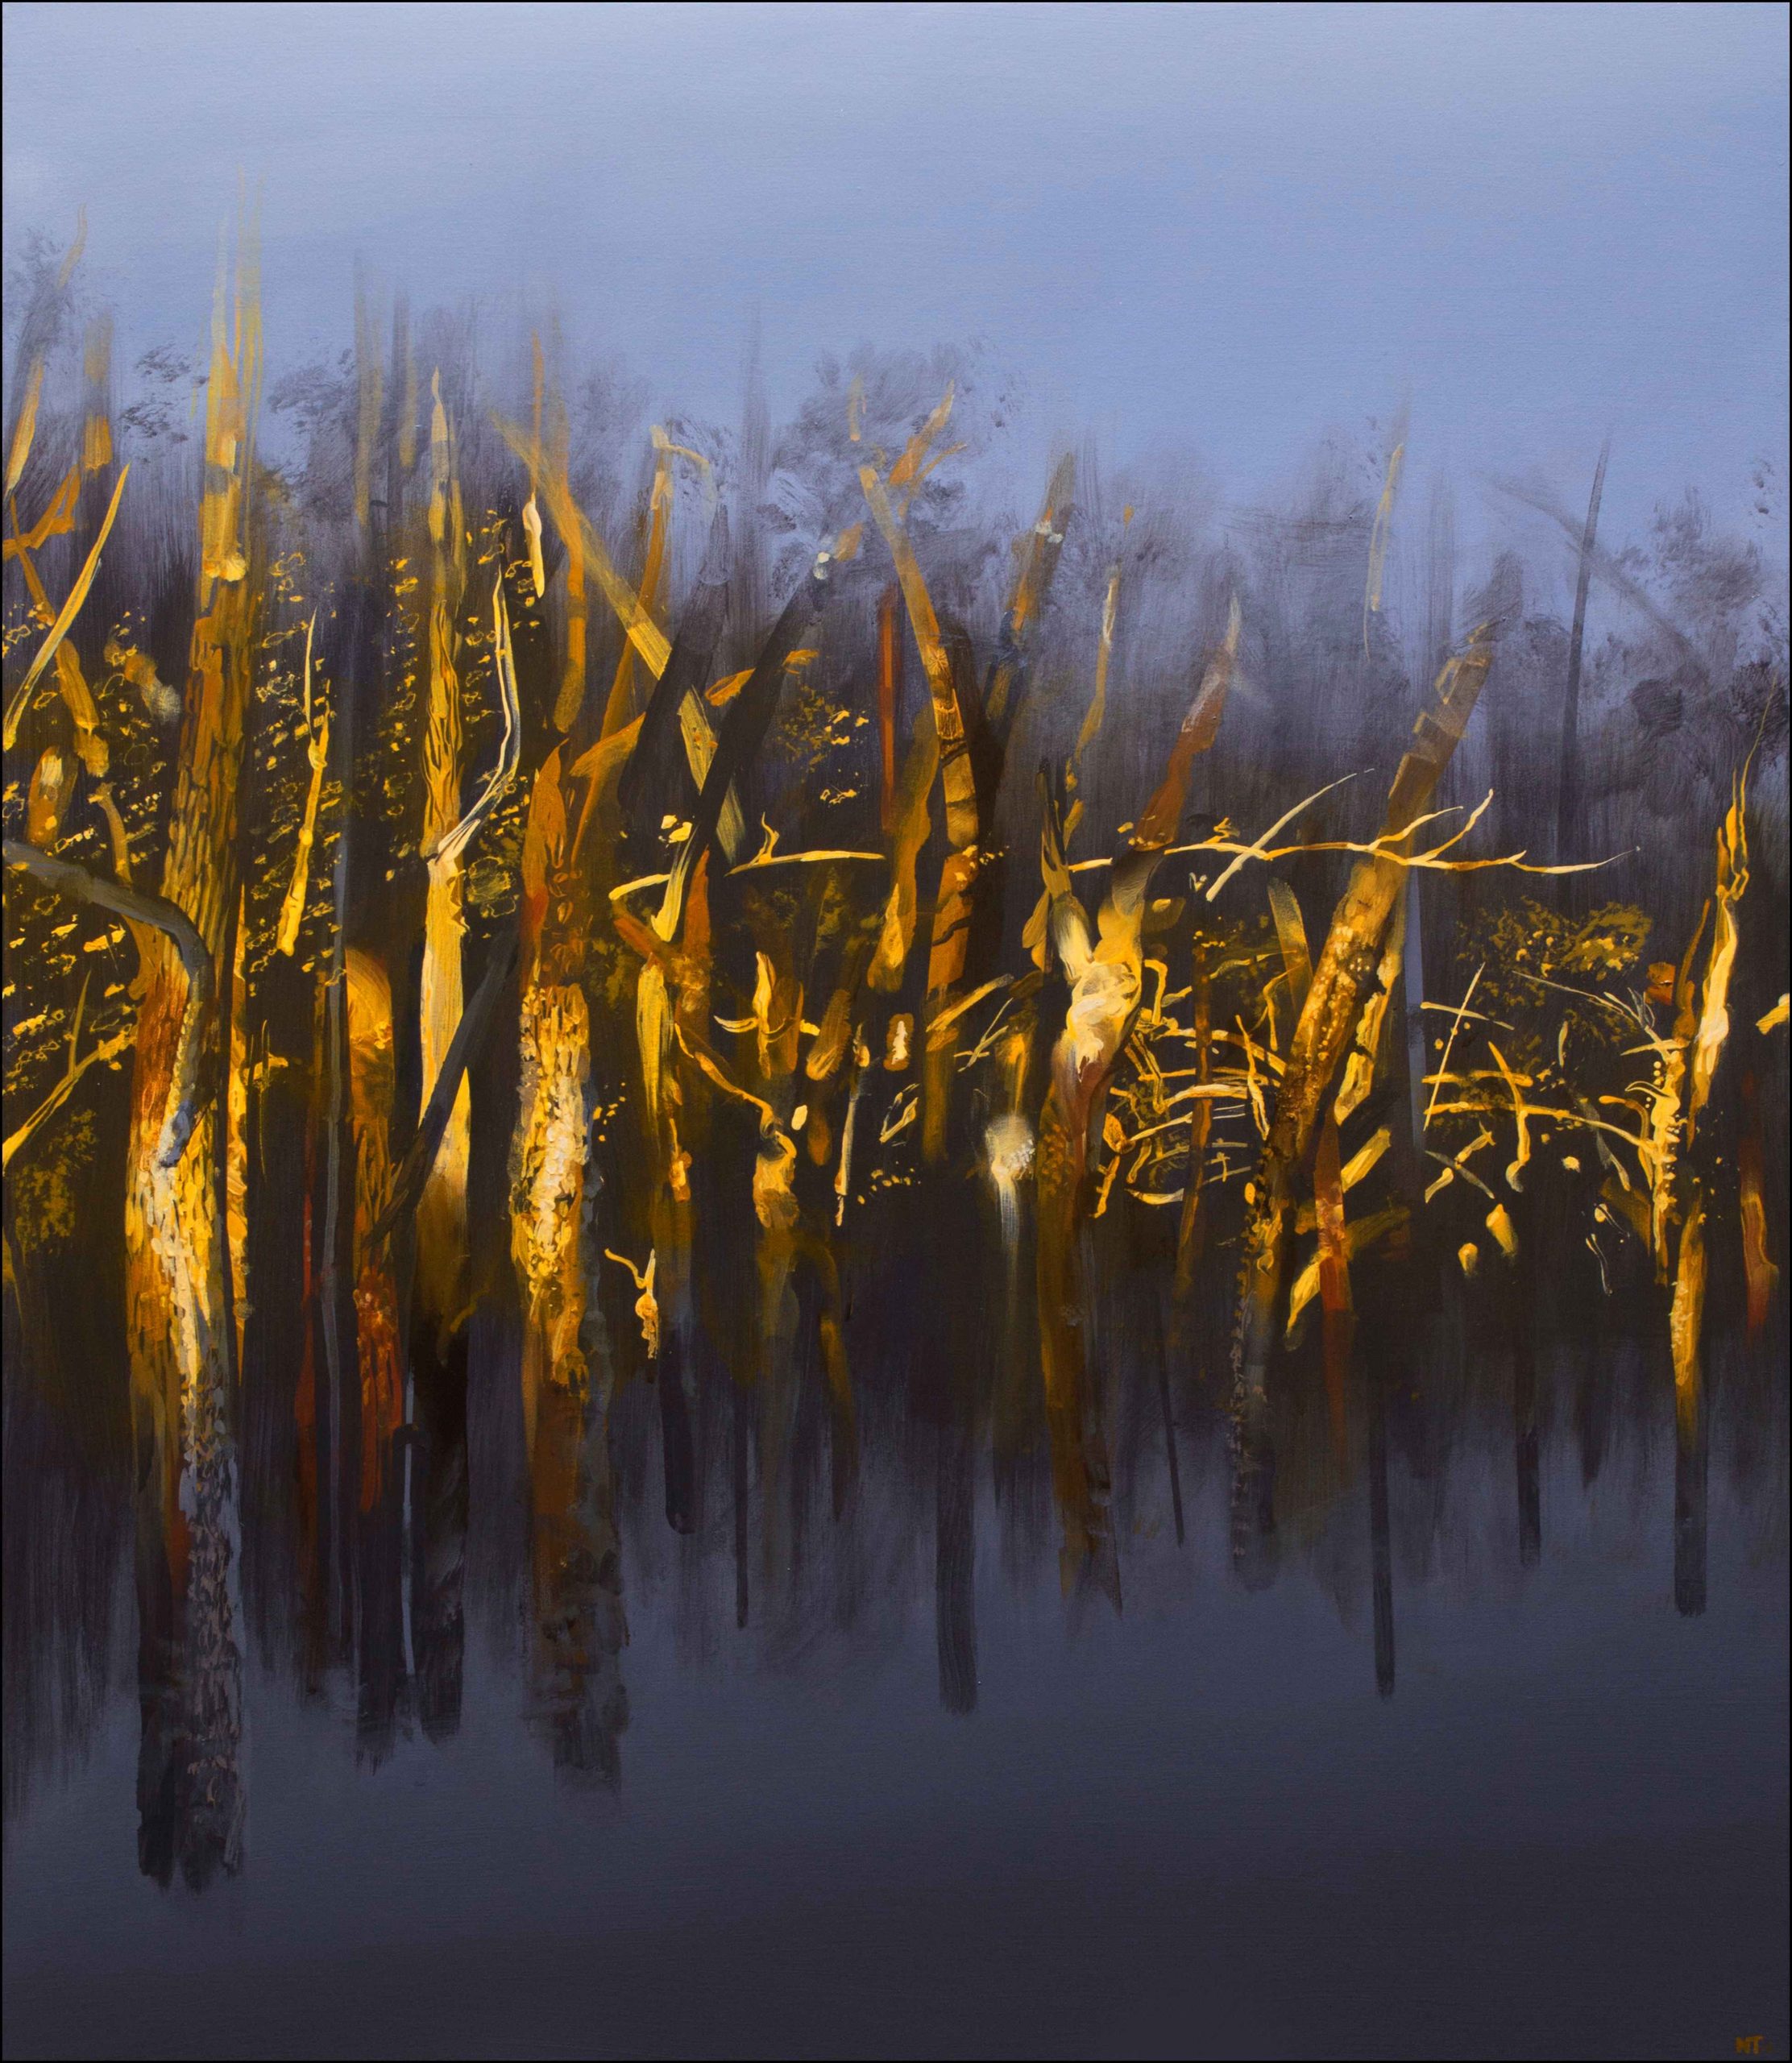 Neil Taylor 'Dawn in the Winter Forest' acrylic on canvas 76 x 66cm $5,000